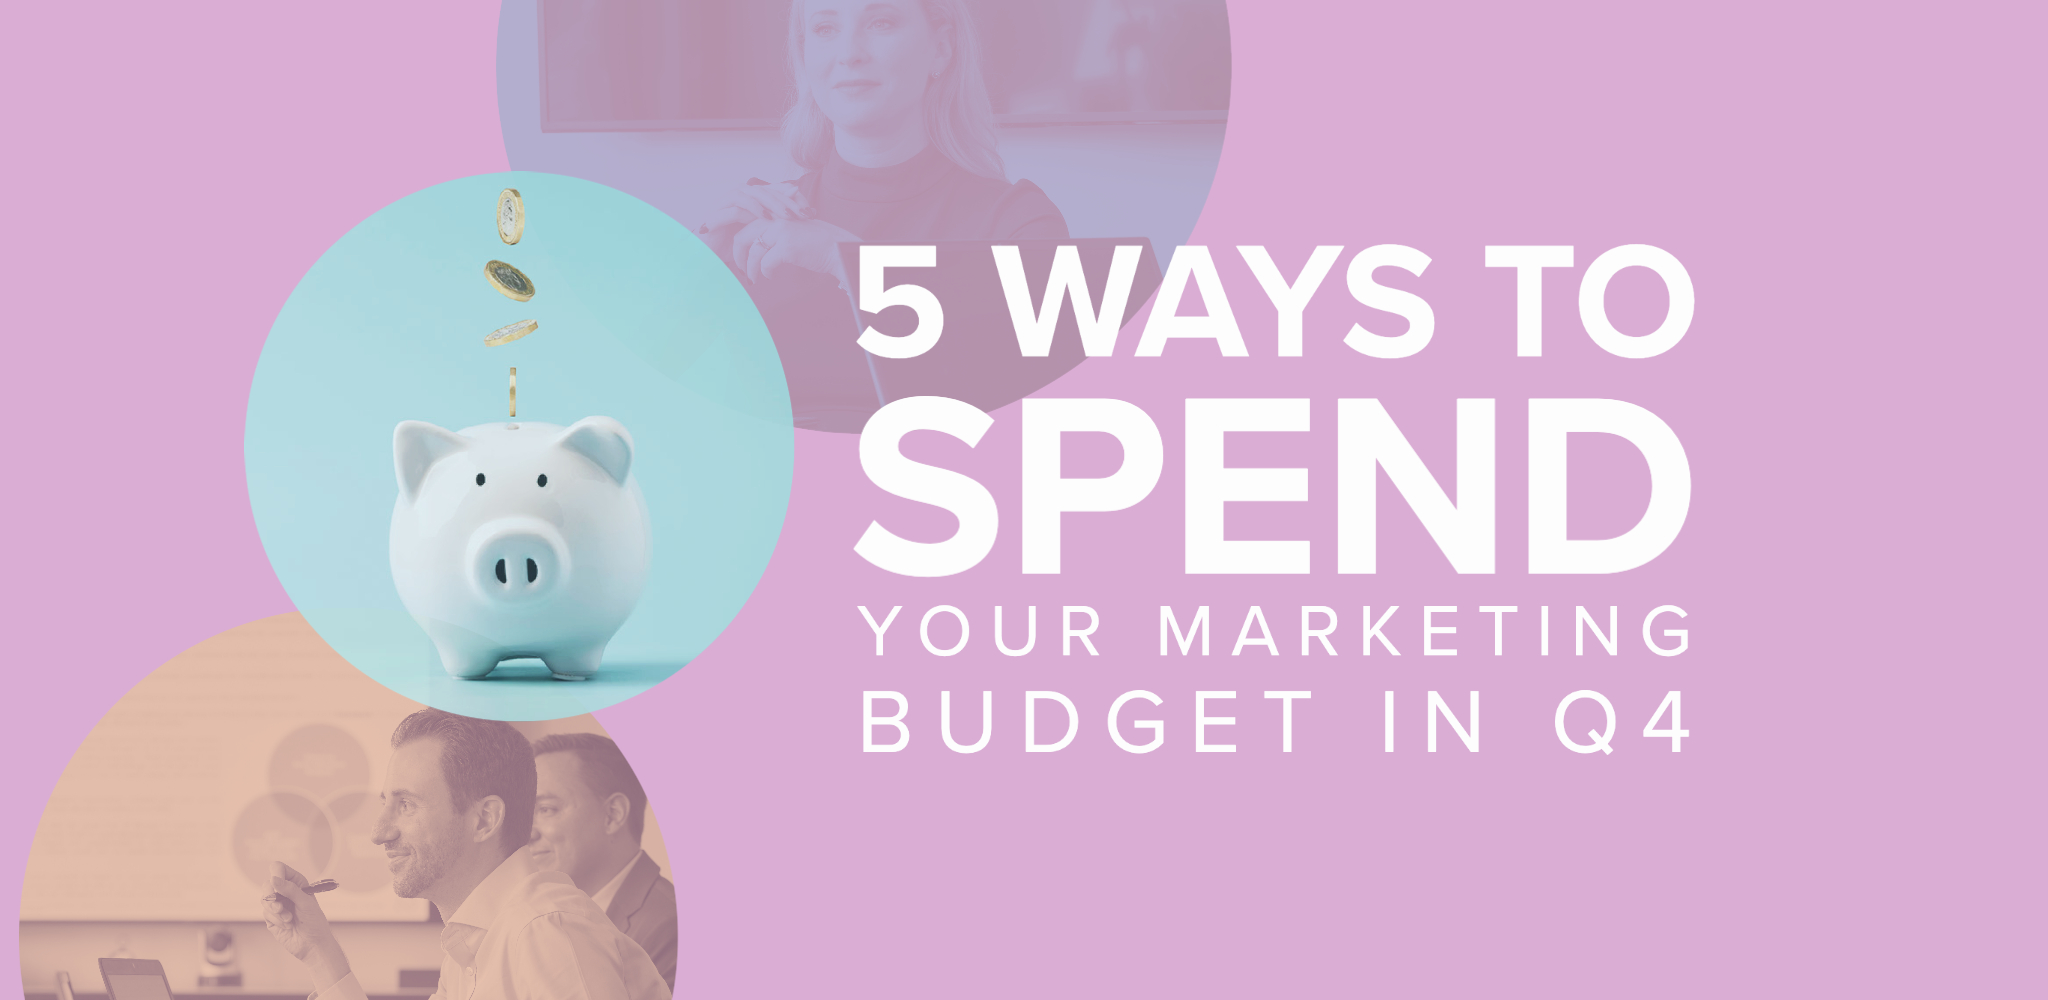 5 ways to spend your budget in Q4